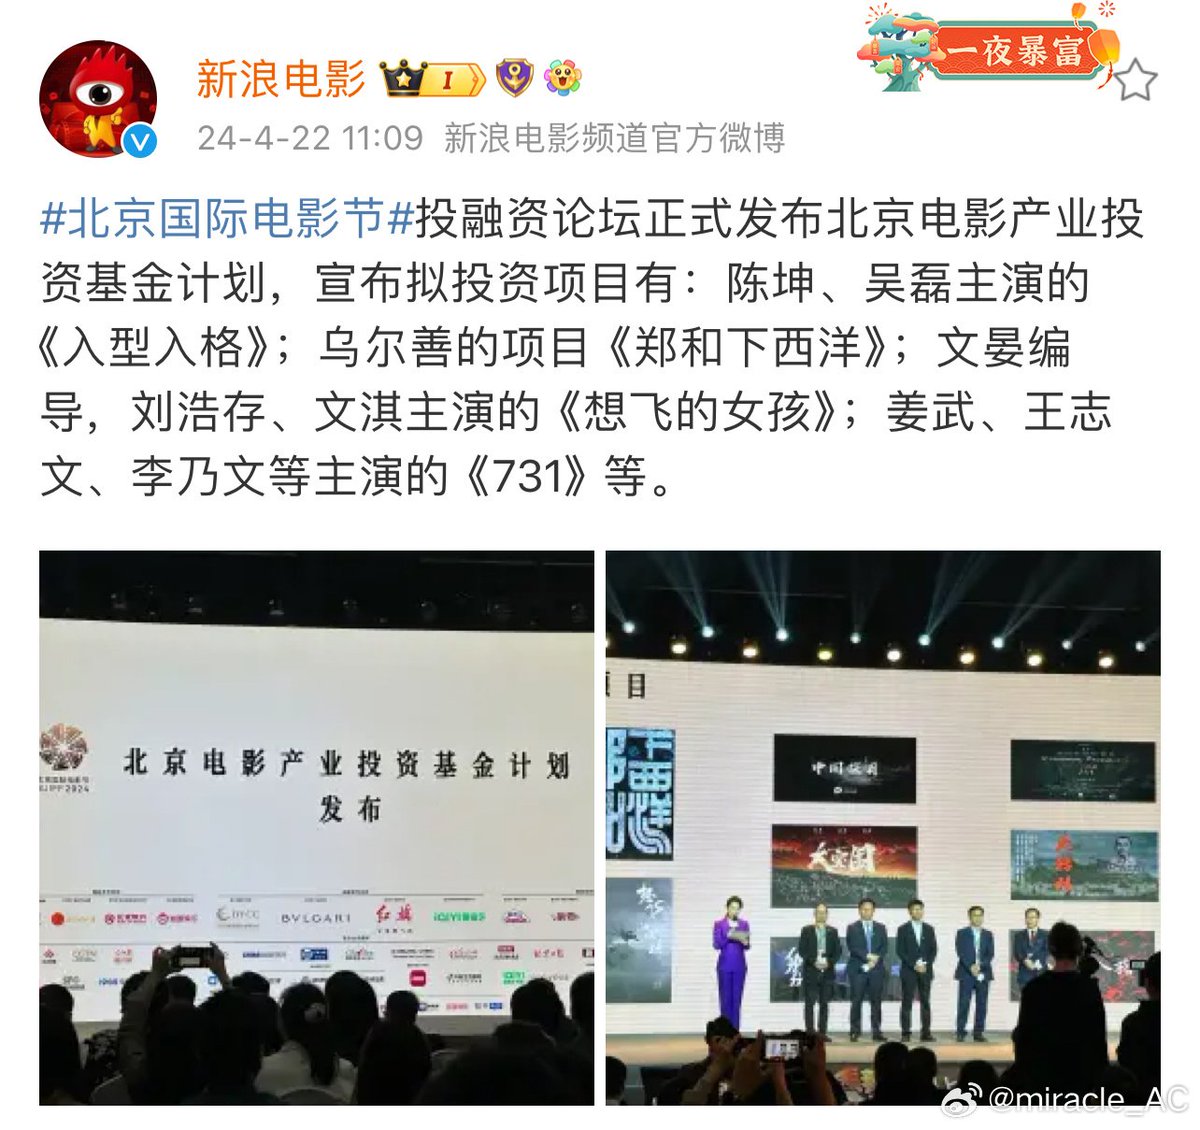 #WuLei doesn't have a company to invest and produce his projects, he's an independent actor... That's why he become the angel investor for #DwellingByTheWestLake and now... BJIFF announced a investment for his next film with Chen Kun #DecentThings. This is really great! 😭